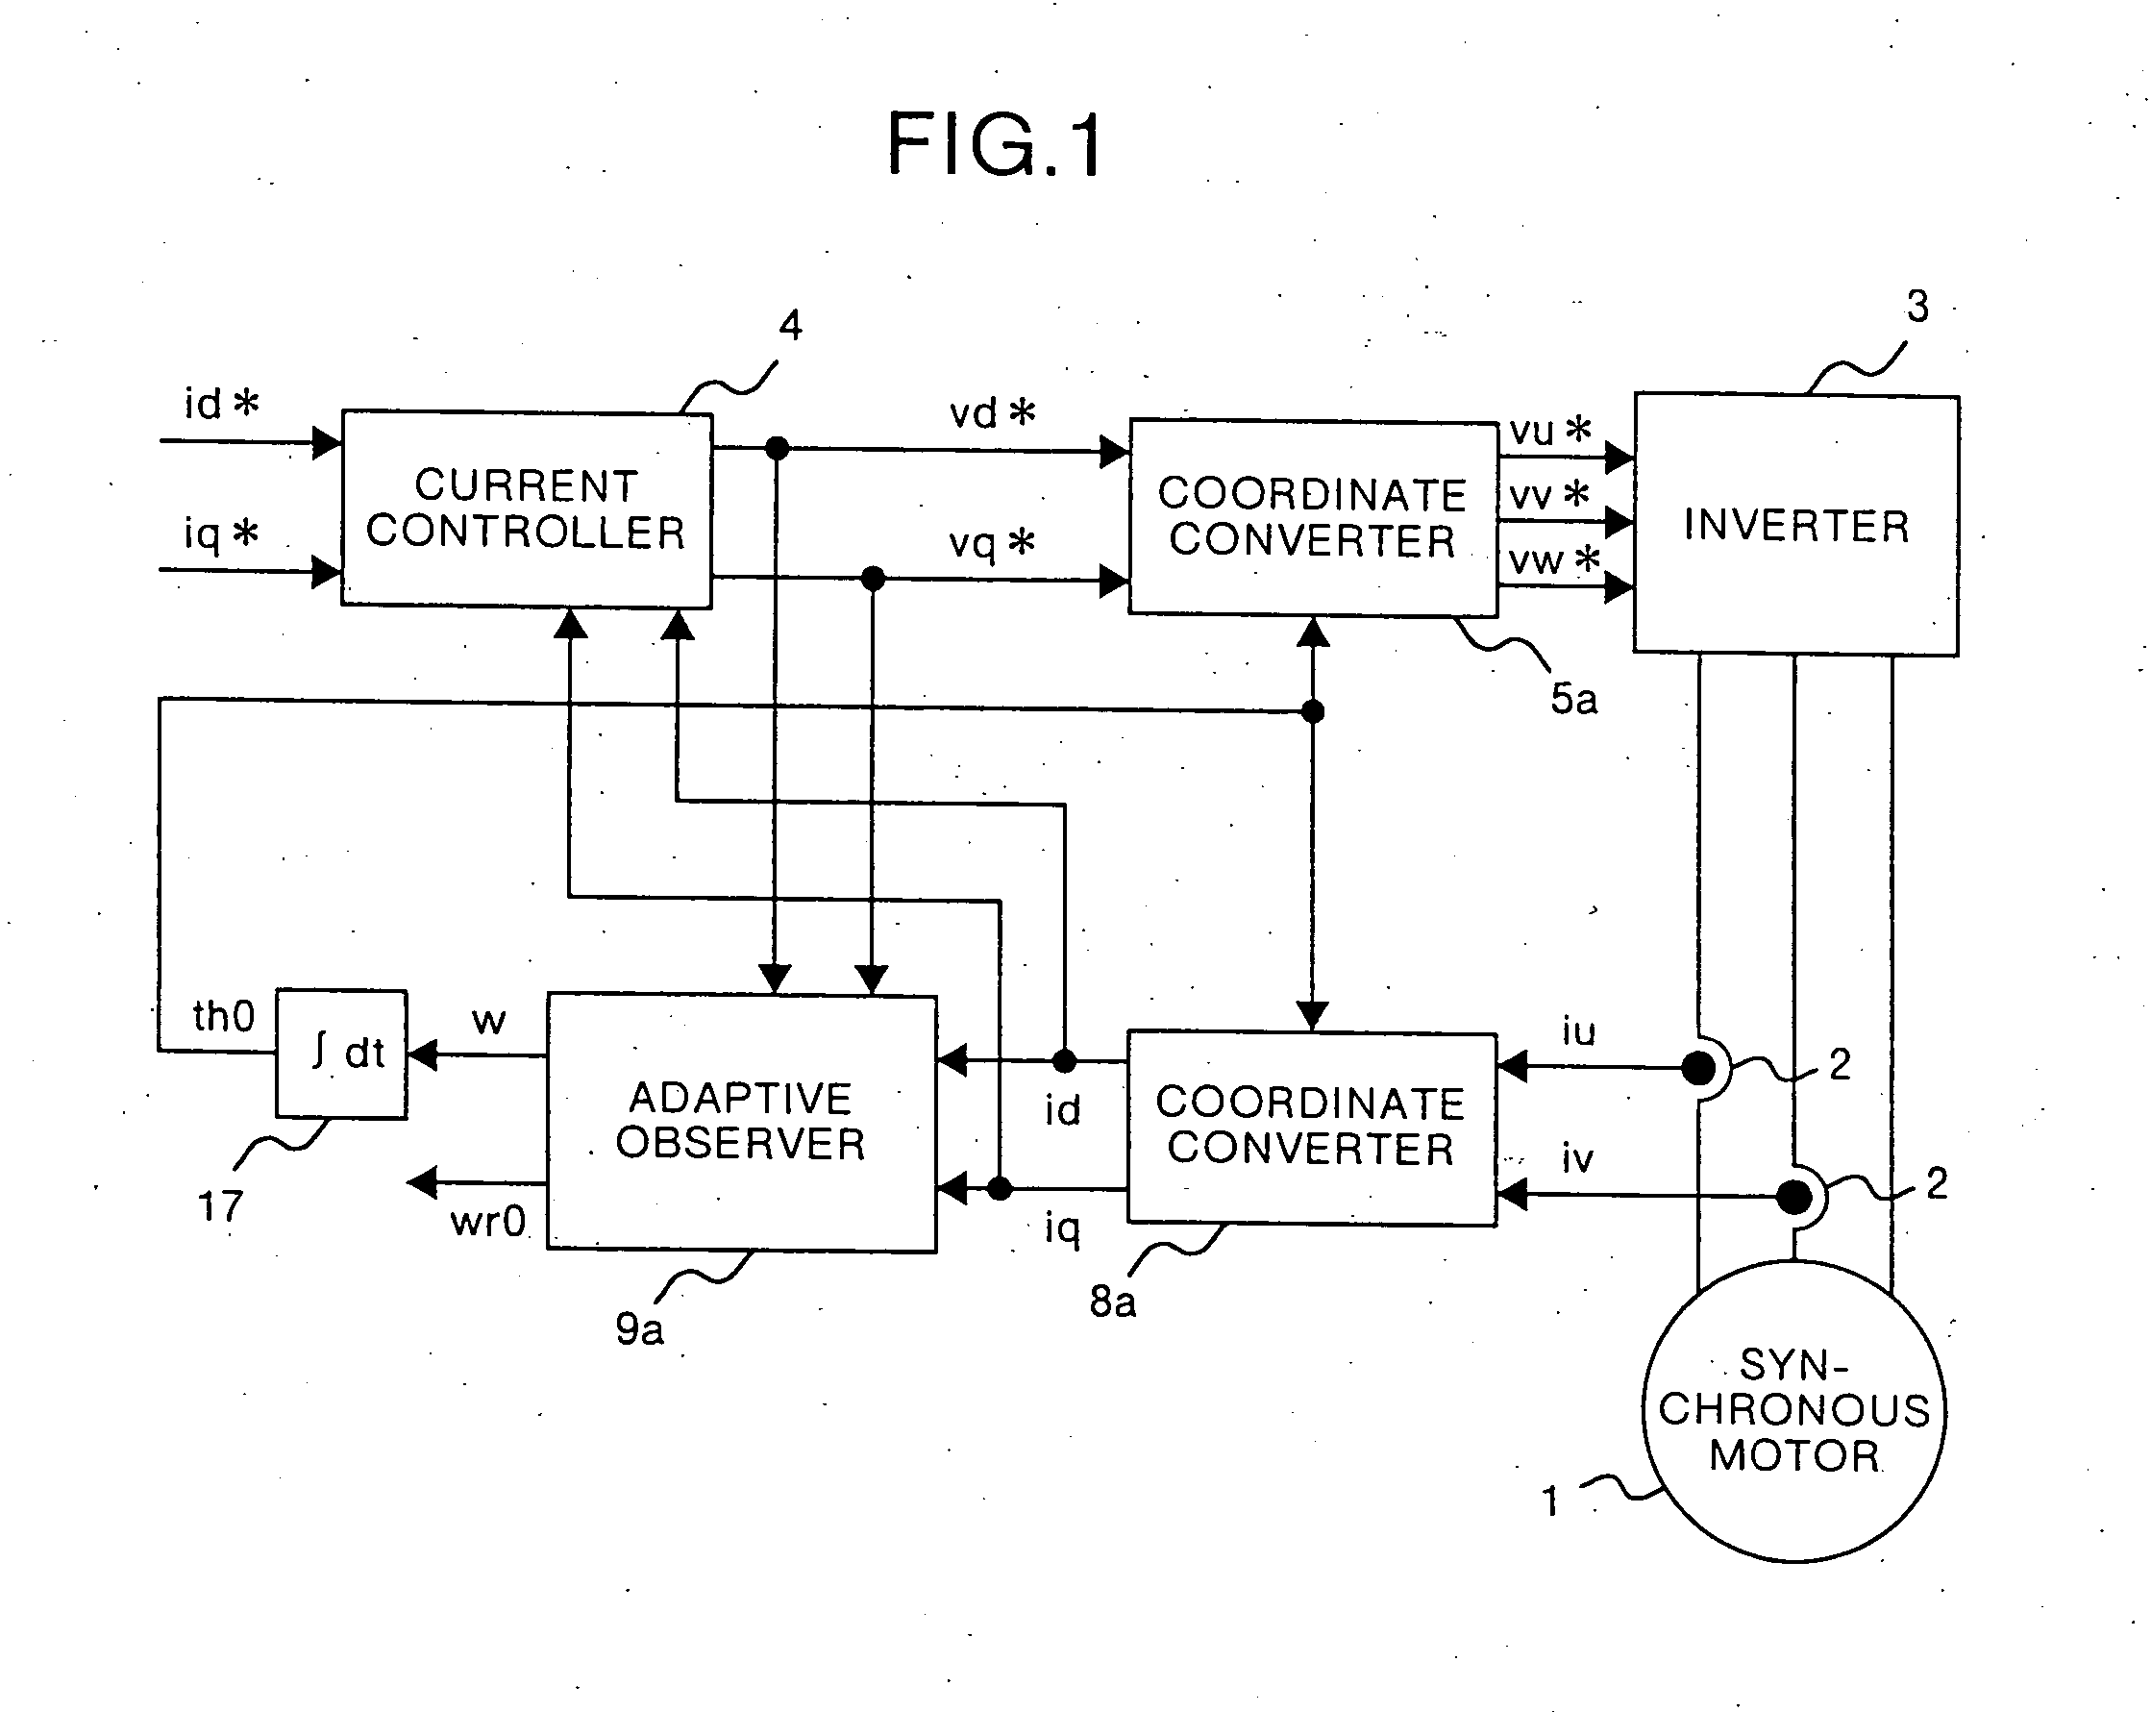 Control apparatus for synchronous motor